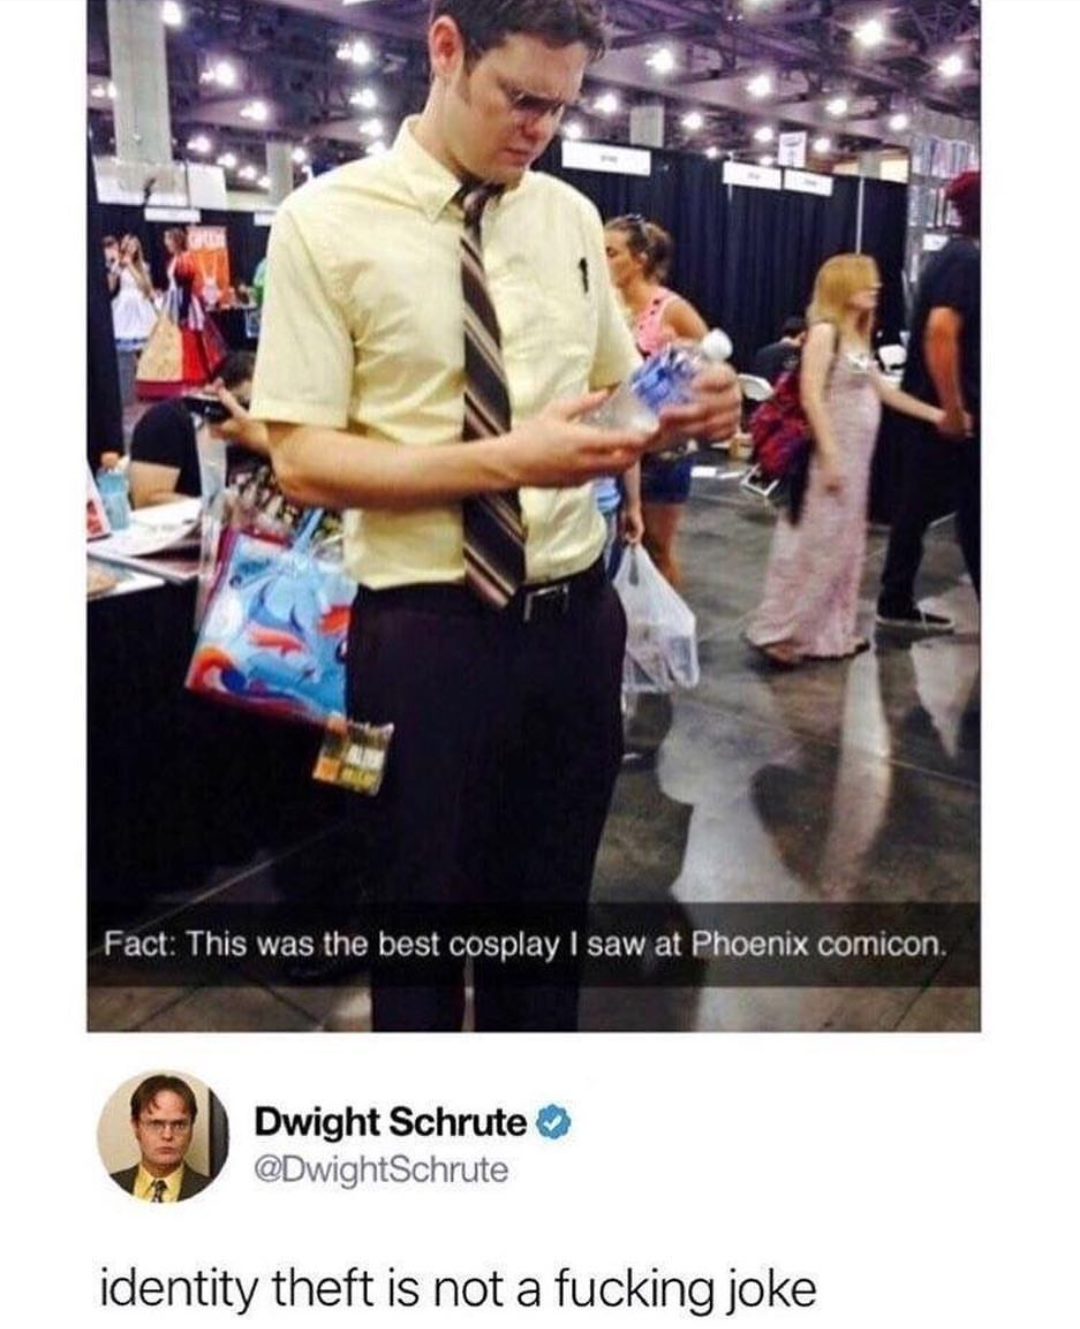 perfect cosplay of Dwight Schrute